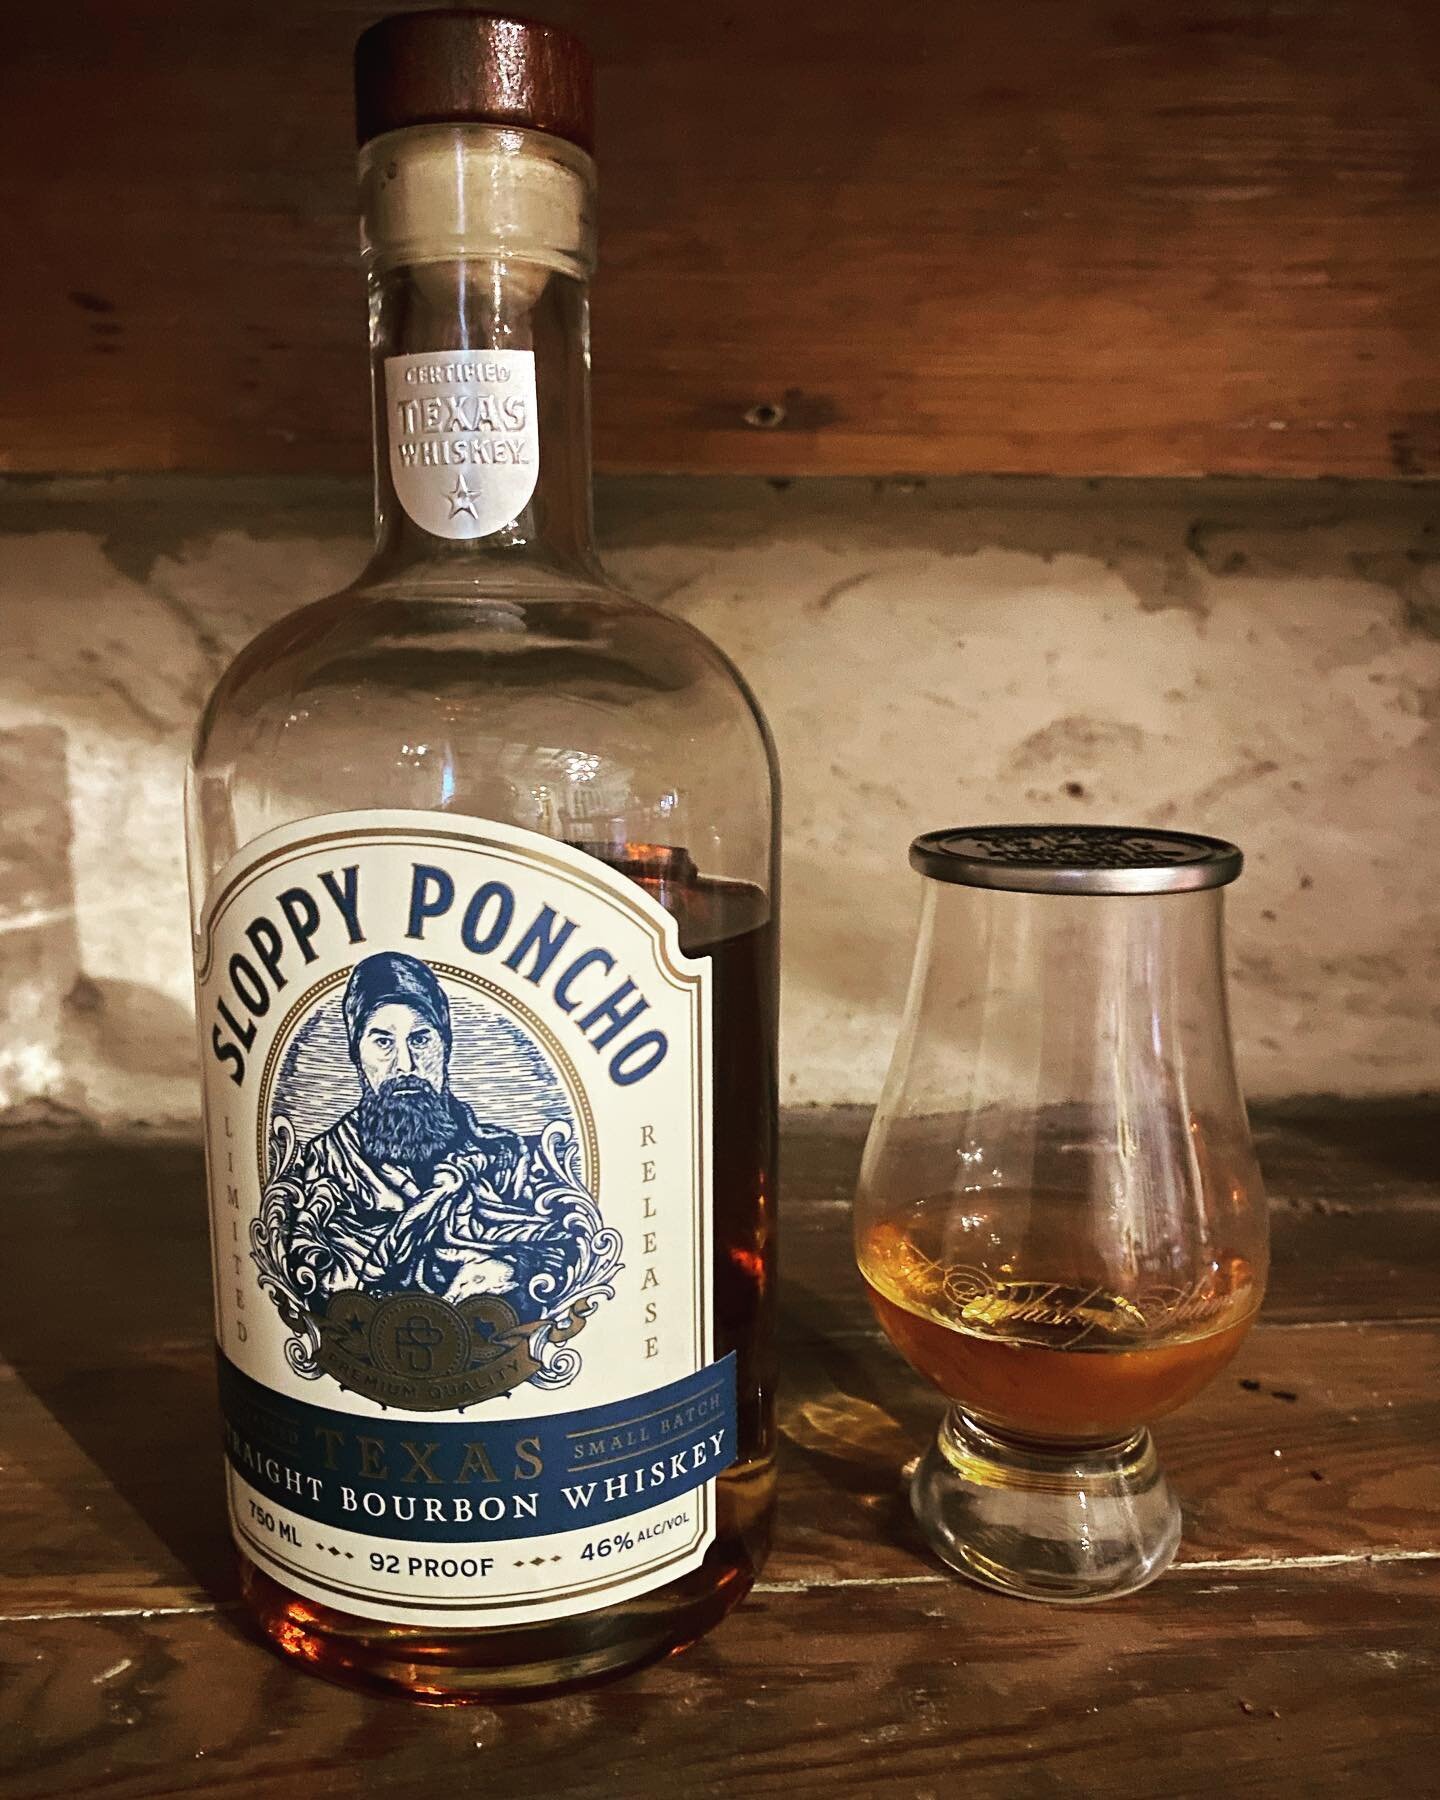 All right for this Sunday&rsquo;s Deep Dive we are cracking into Sloppy Poncho from The Crowded Barrel. This straight bourbon whiskey is not only small batch, but hand crafted as well.  This limited release whiskey is a Texas tradition with a long st